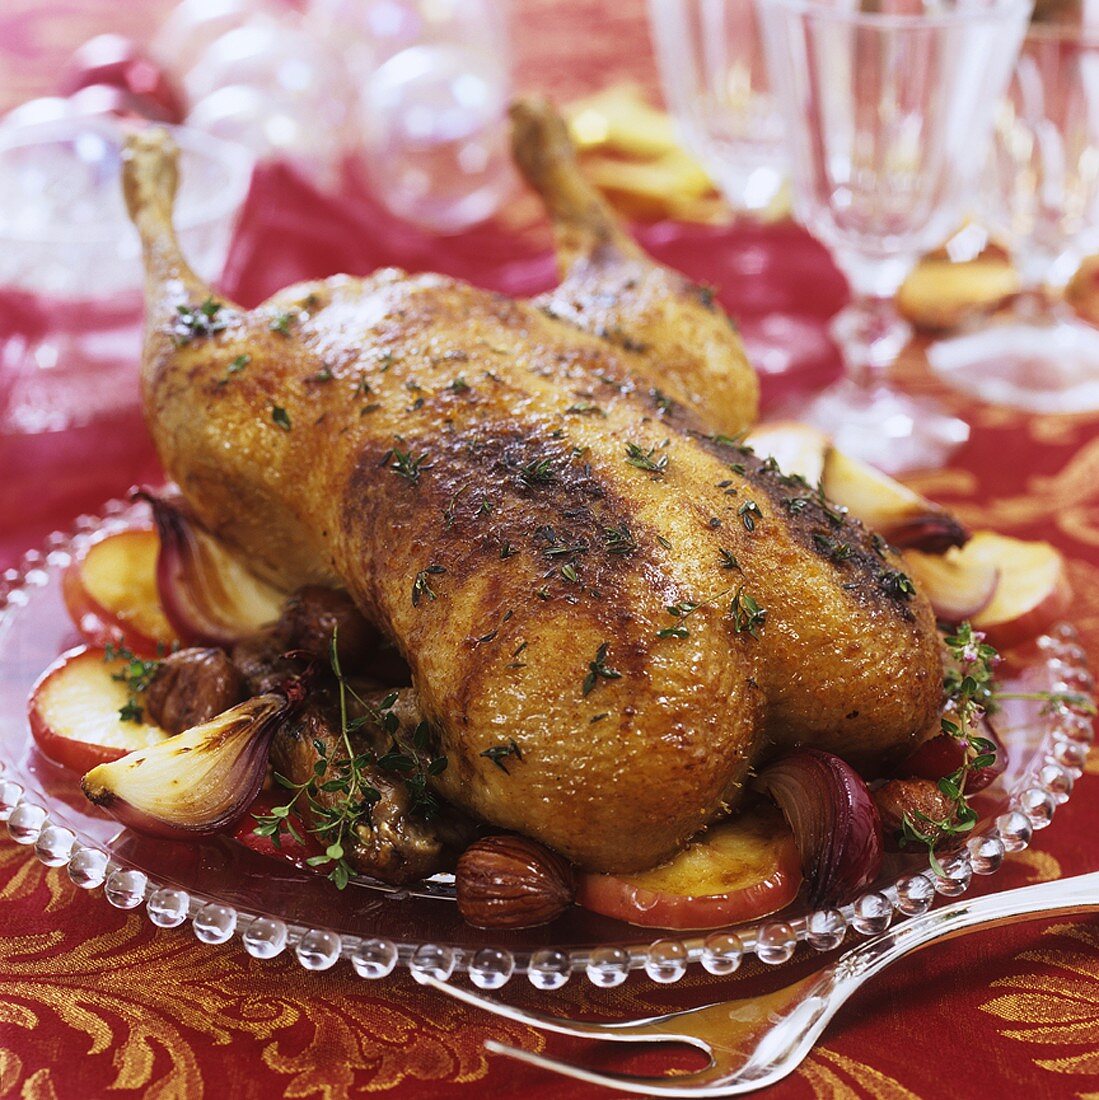 Festive roast duck with apples and sweet chestnuts